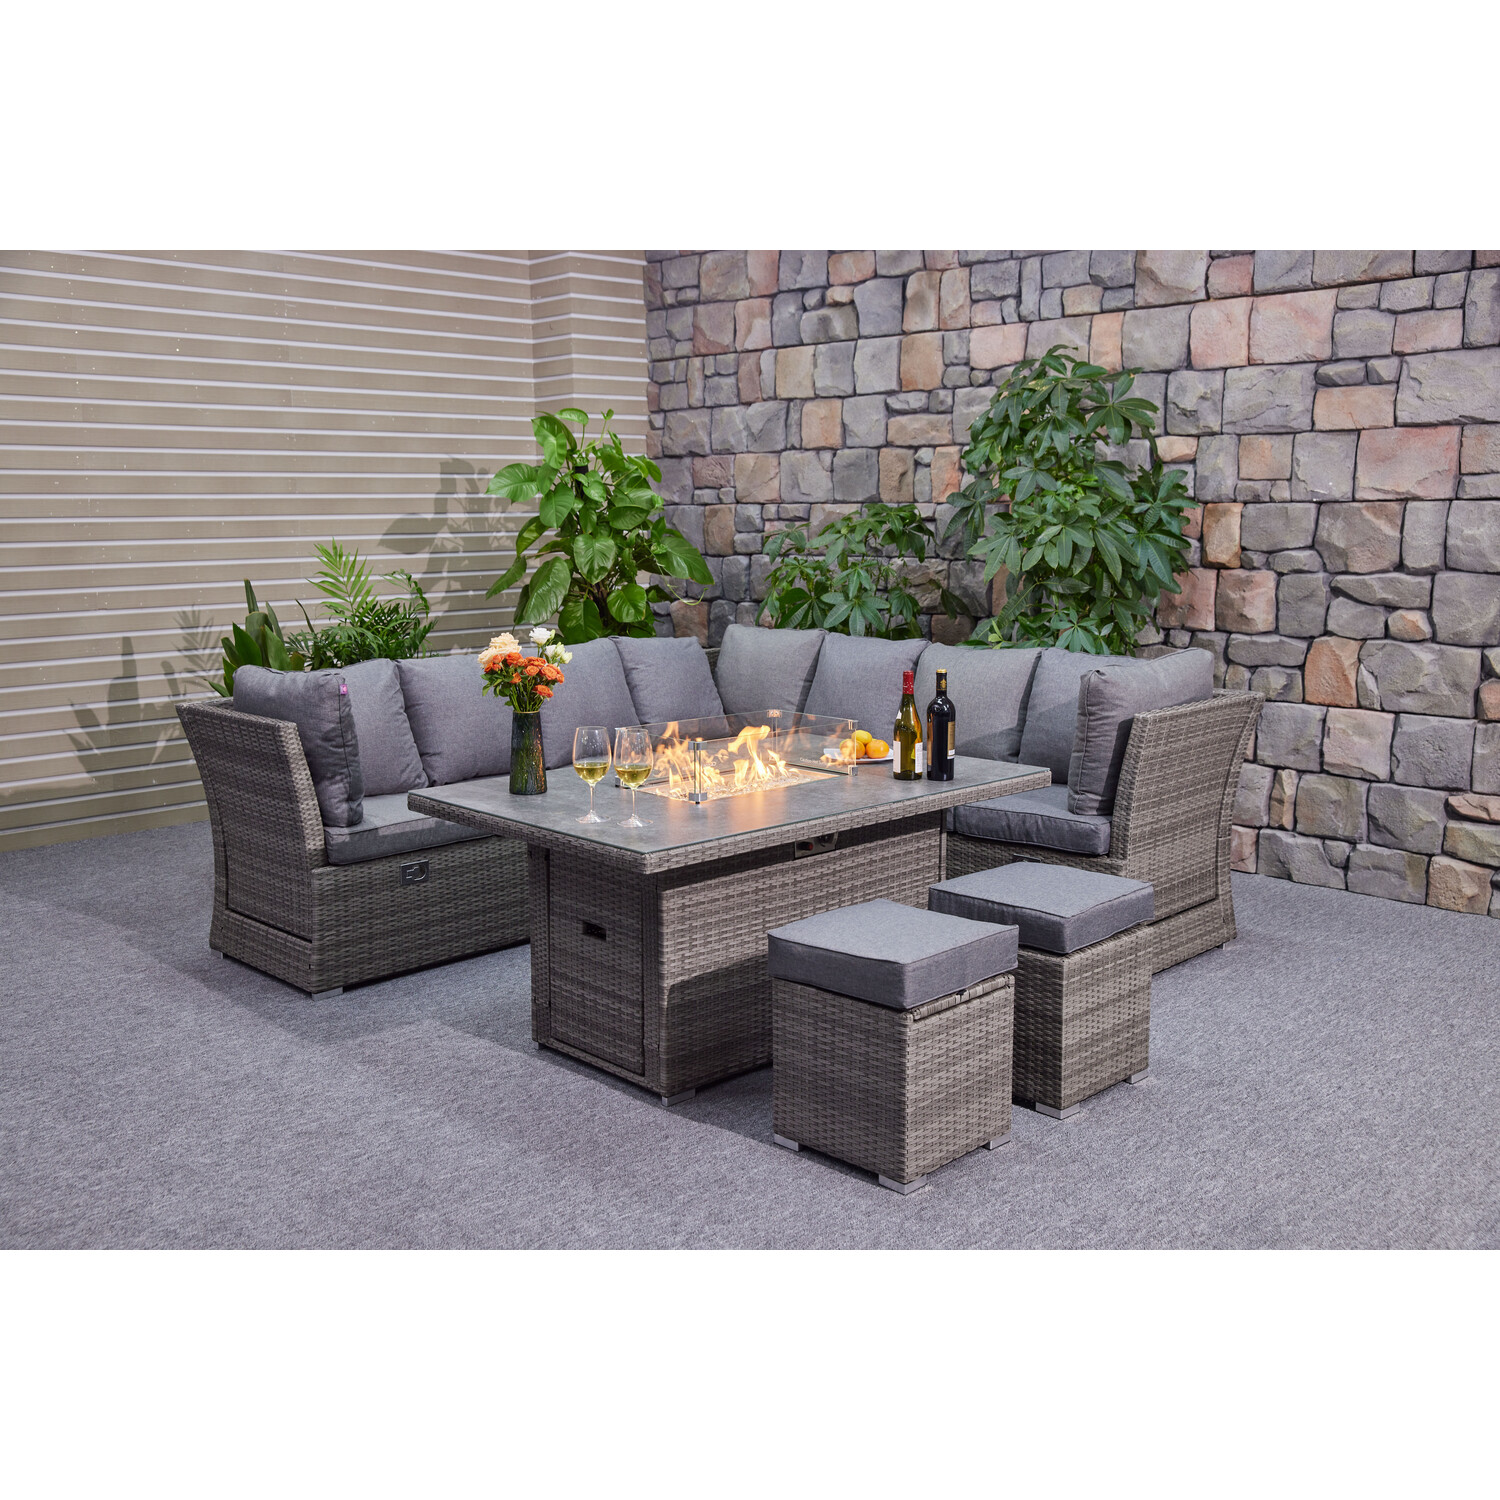 Malay Deluxe Malay New Hampshire 6 Seater Grey Wicker Fire Pit Garden Lounge Set Image 3